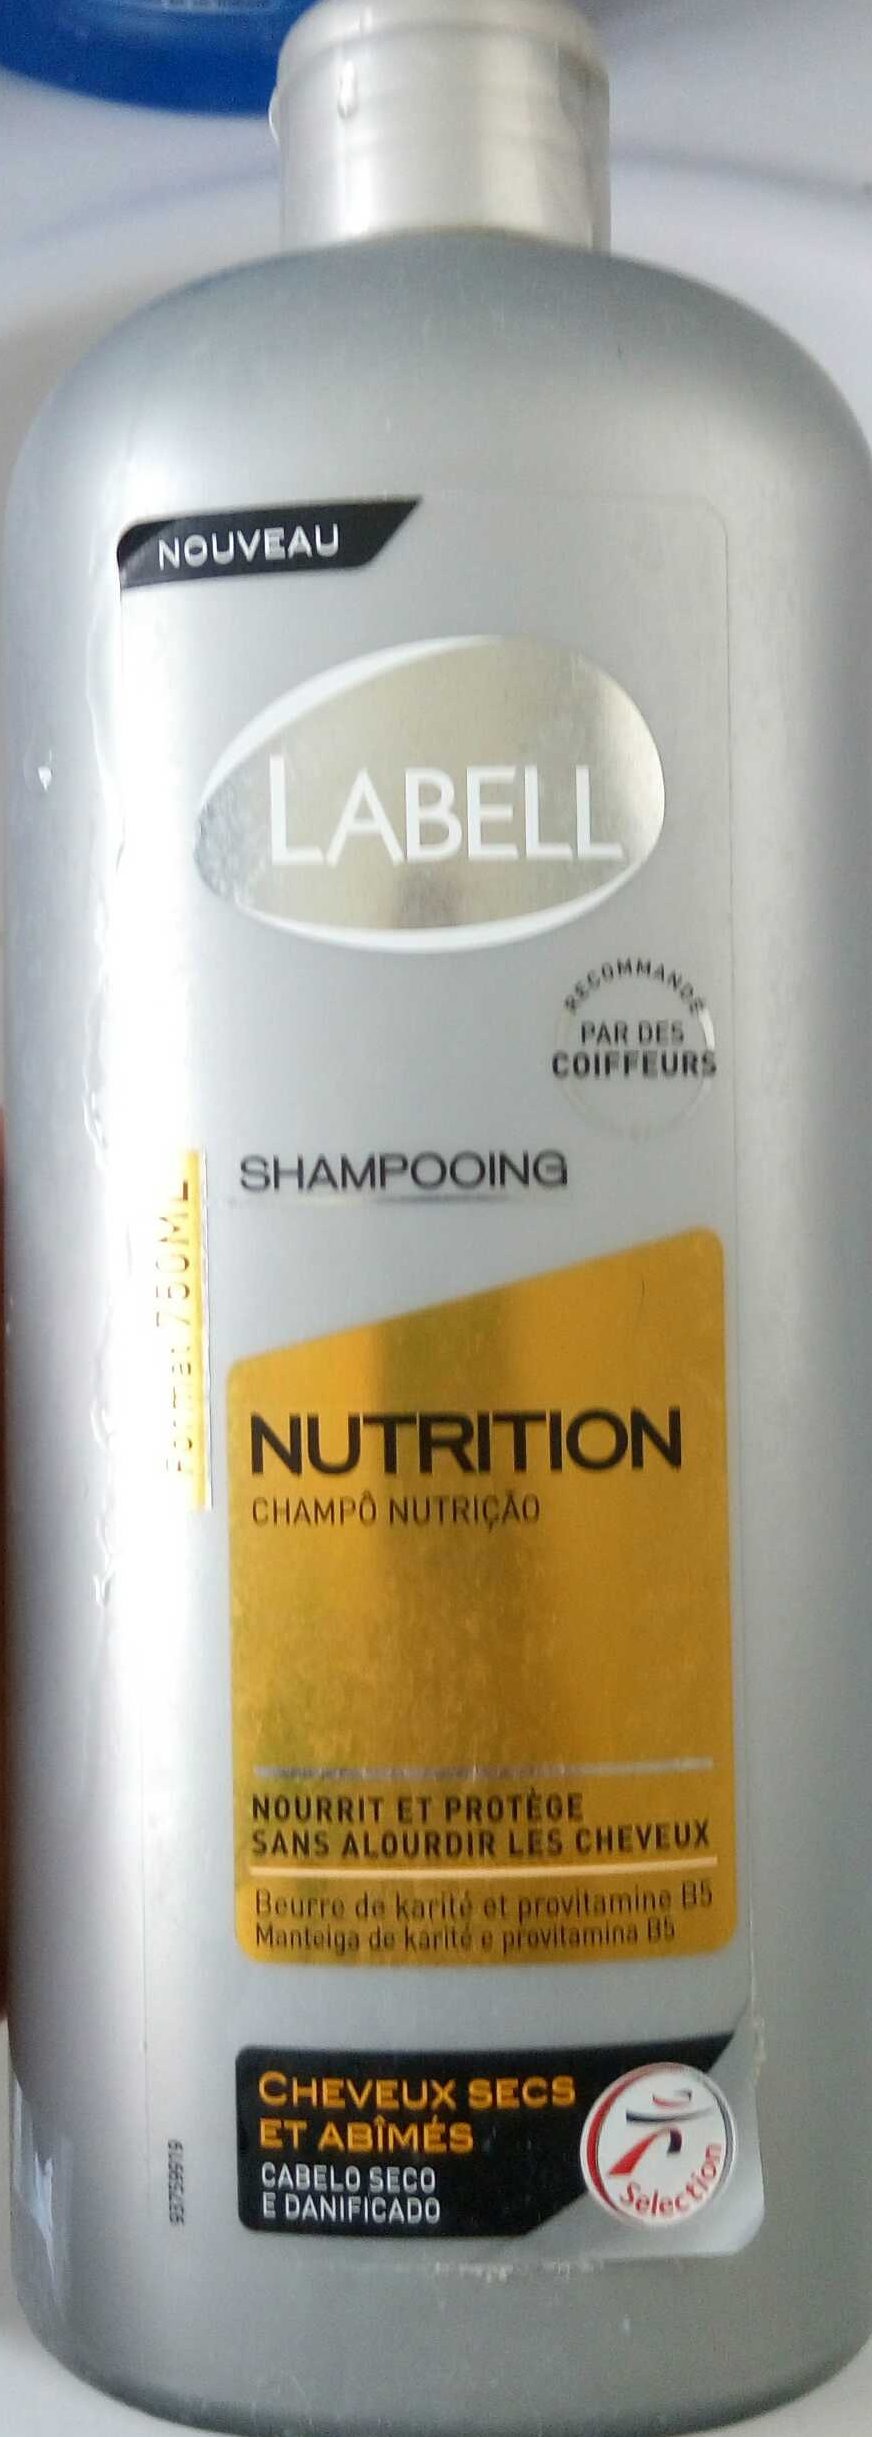 Shampooing Nutrition - Tuote - fr